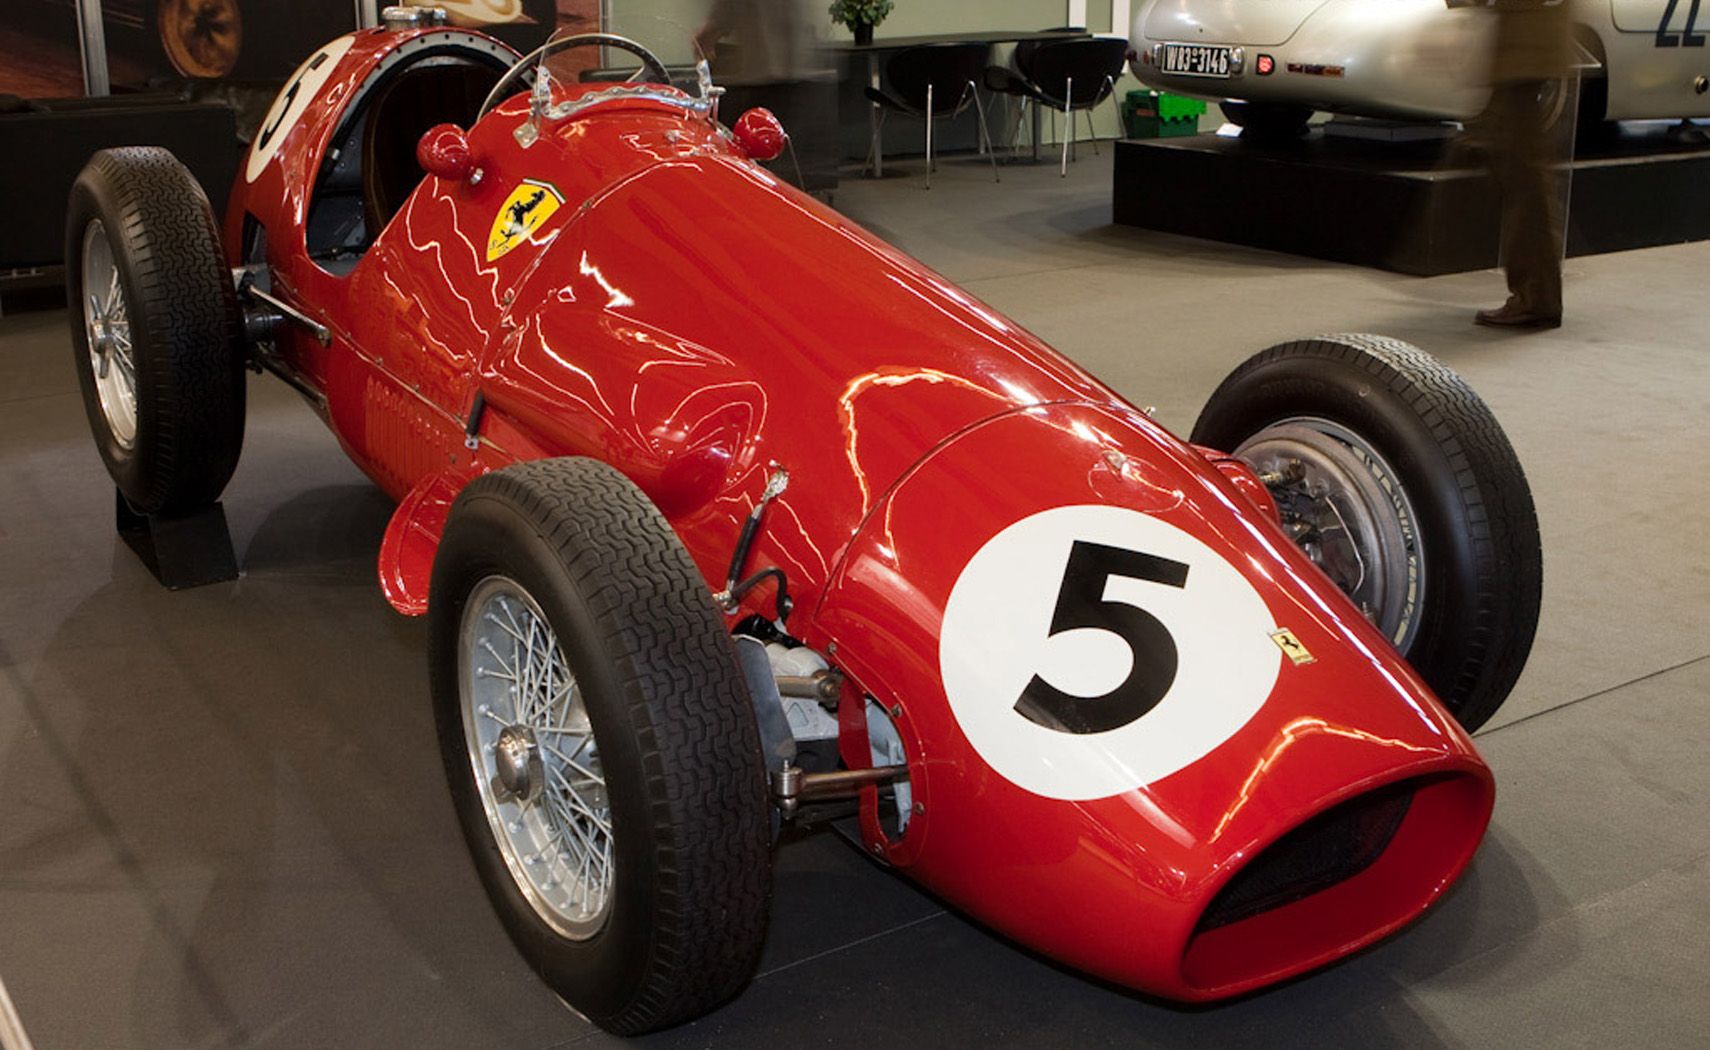 And Ferrari’s Chief Designer, Aurelio Lampredi Already Had An Ace Up His Sleeve, In The Simple But Superb Tipo 500, As In, Type 500